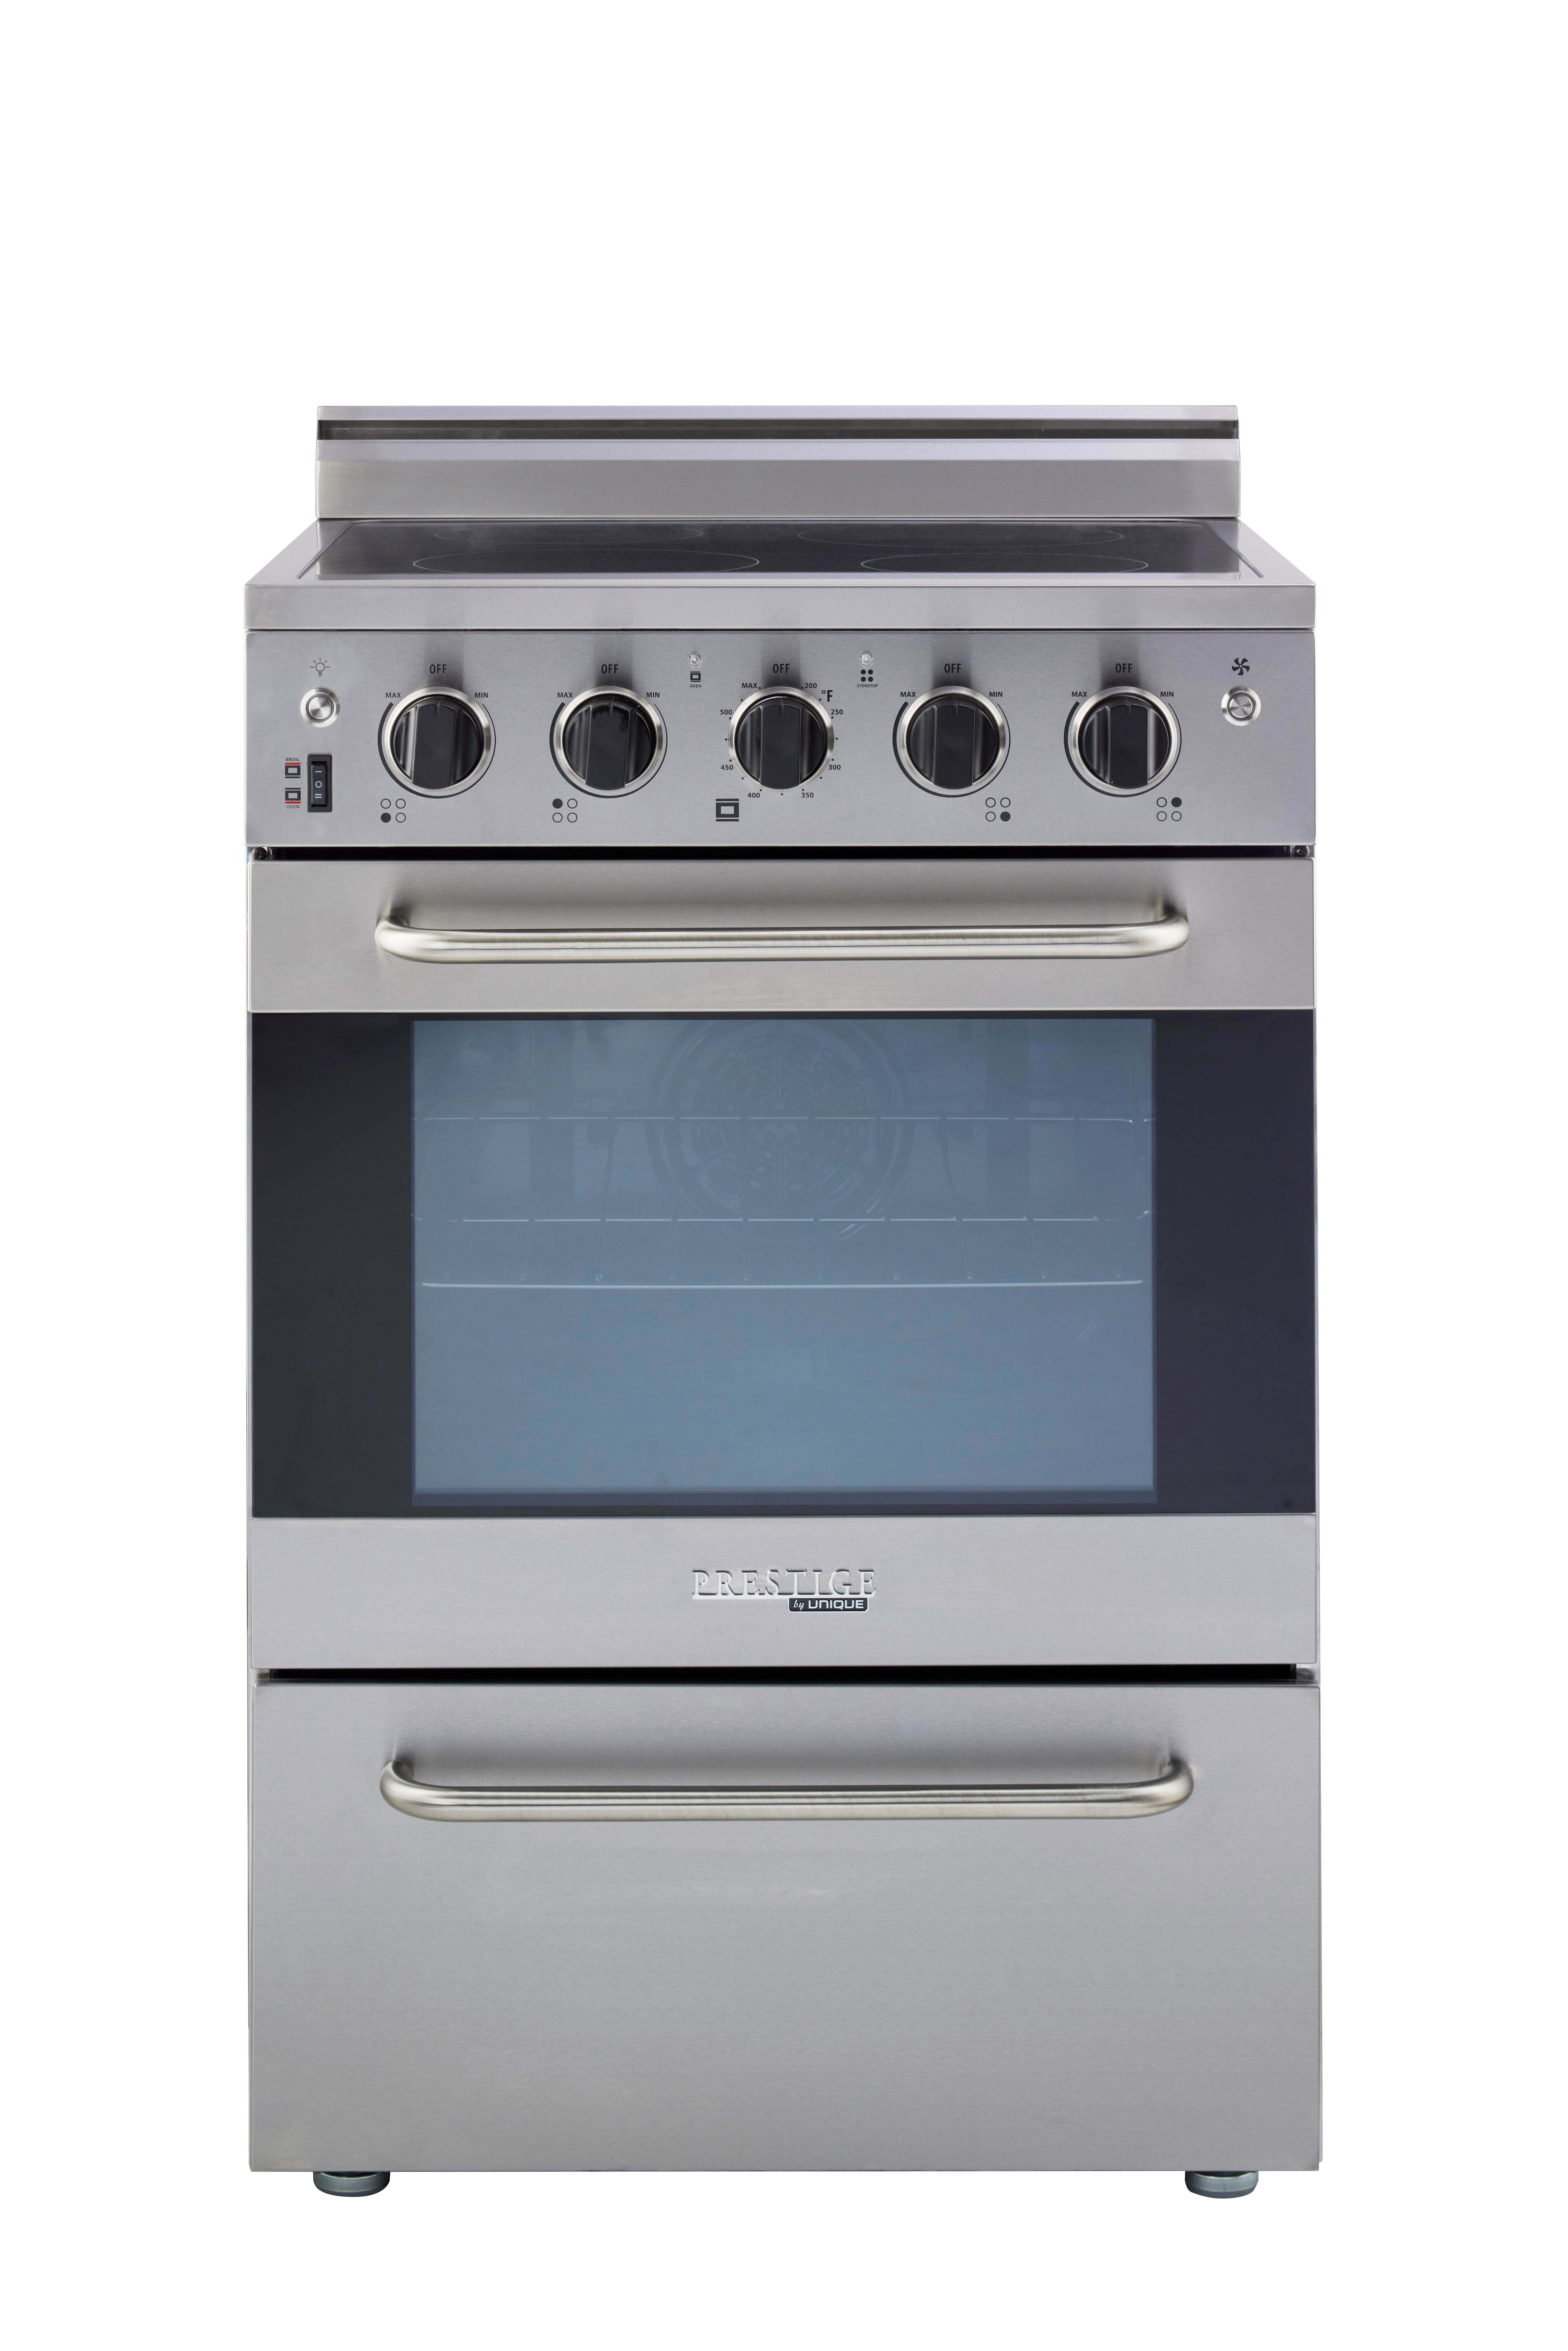 Unique Appliances Prestige 24 in. 2.3 Cu. ft. Electric Range with Convection Oven in Stainless Steel, Silver